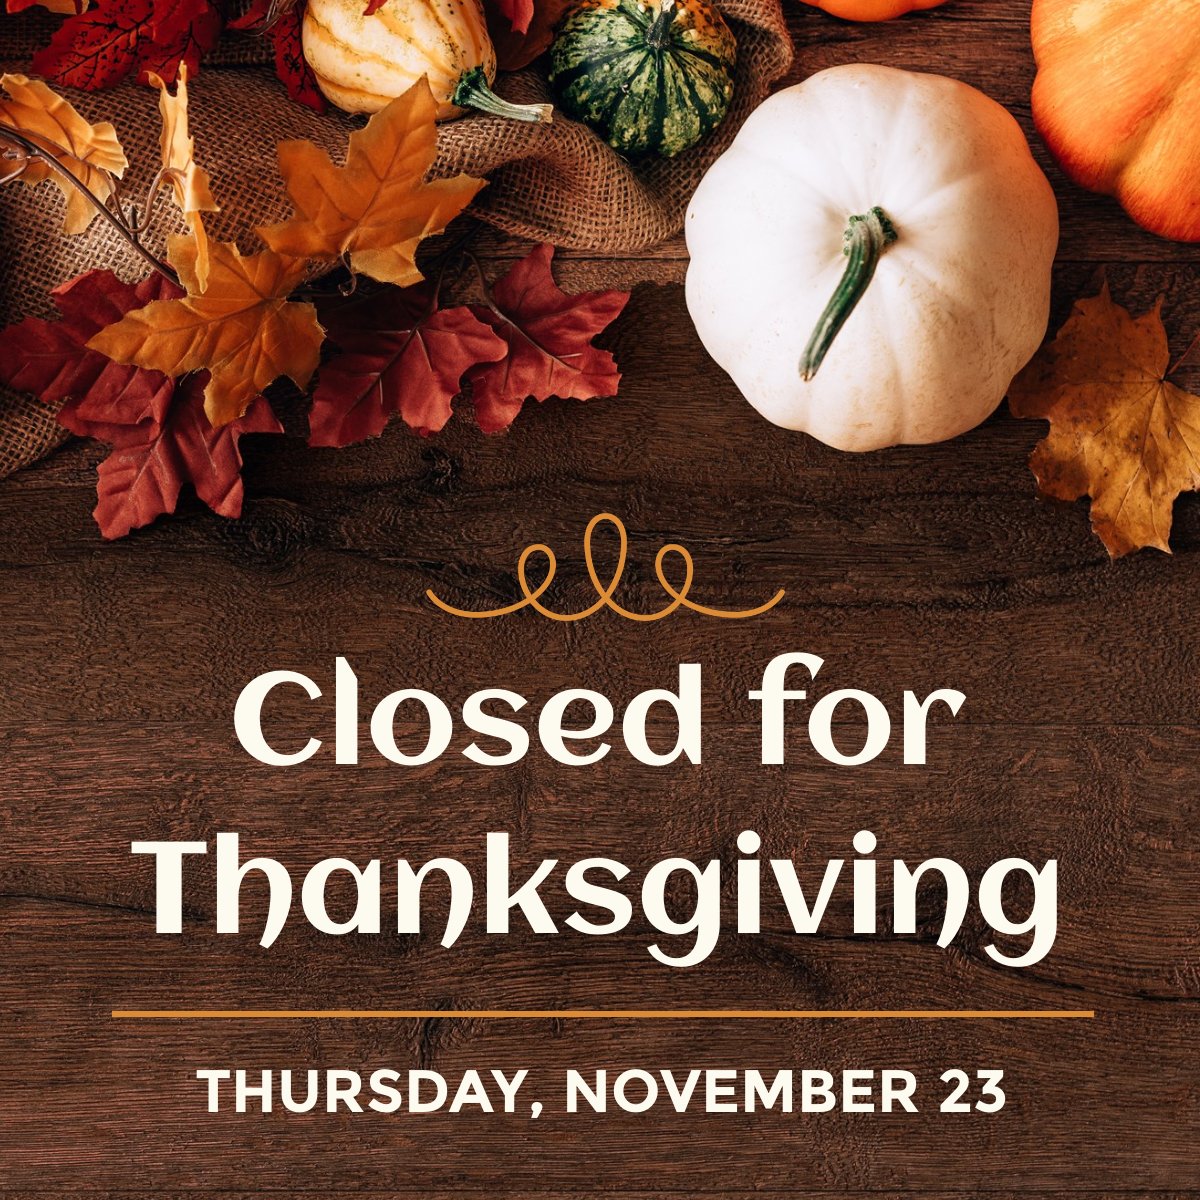 Closed for Thanksgiving Thursday, November 23. Background features leaves, pumpkins and gourds scattered on a wooden table.